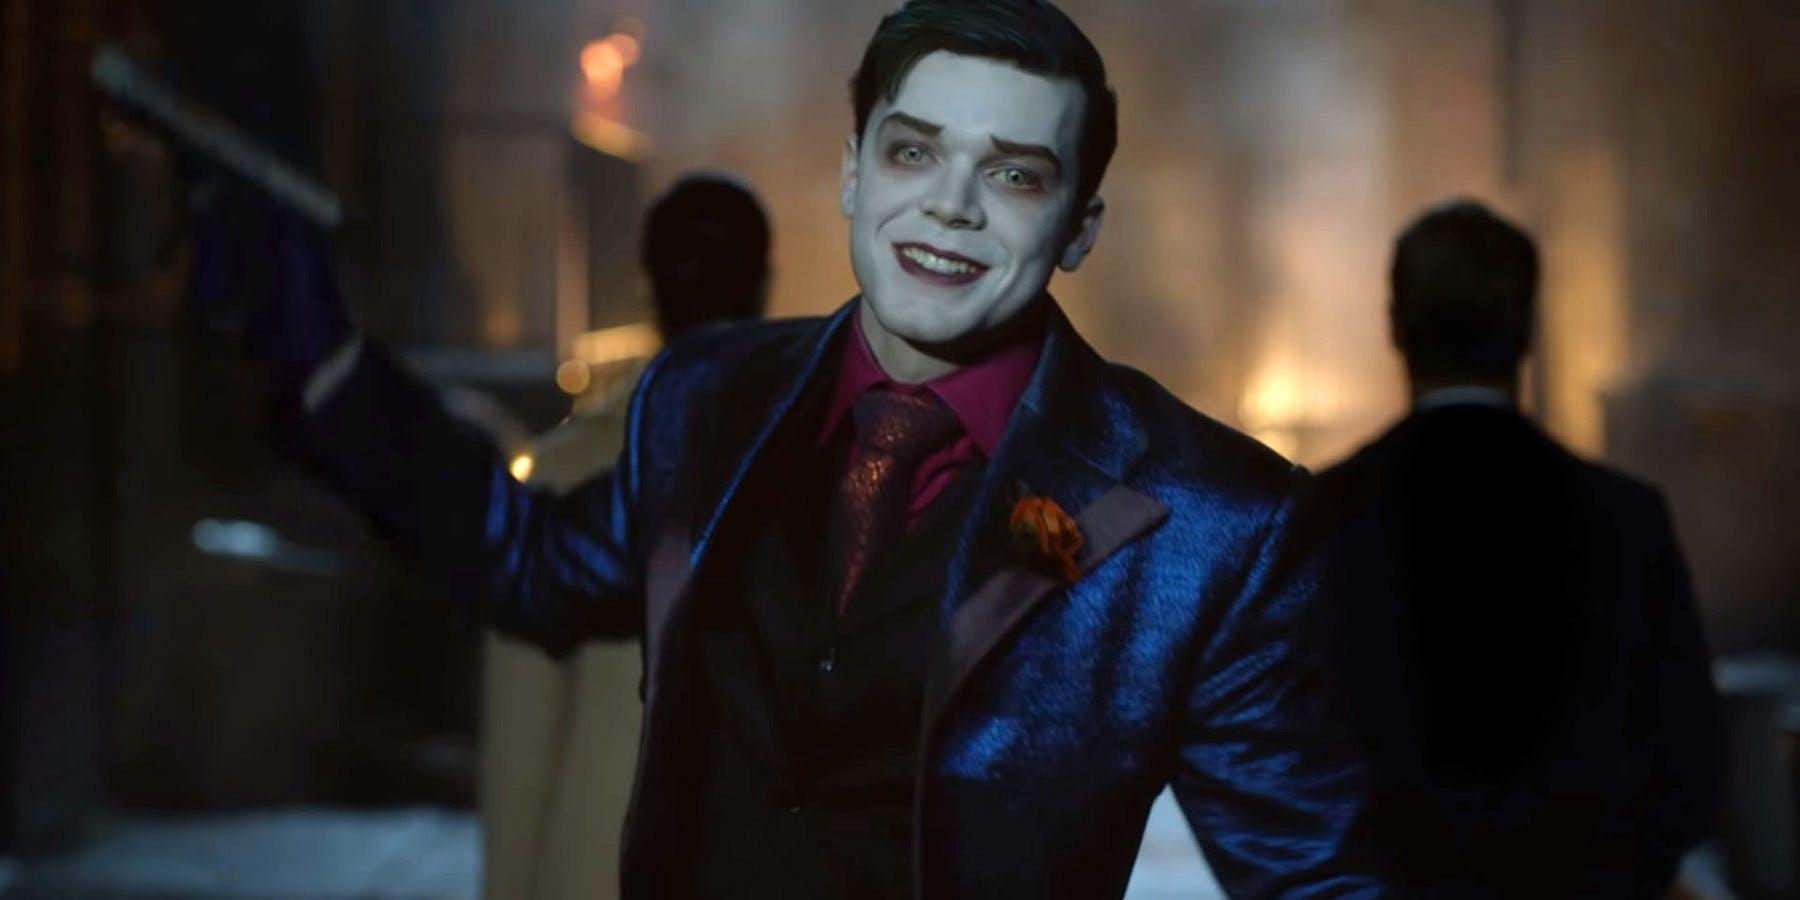 Gotham's Joker: 5 Things They Changed (and 5 They Kept the Same)